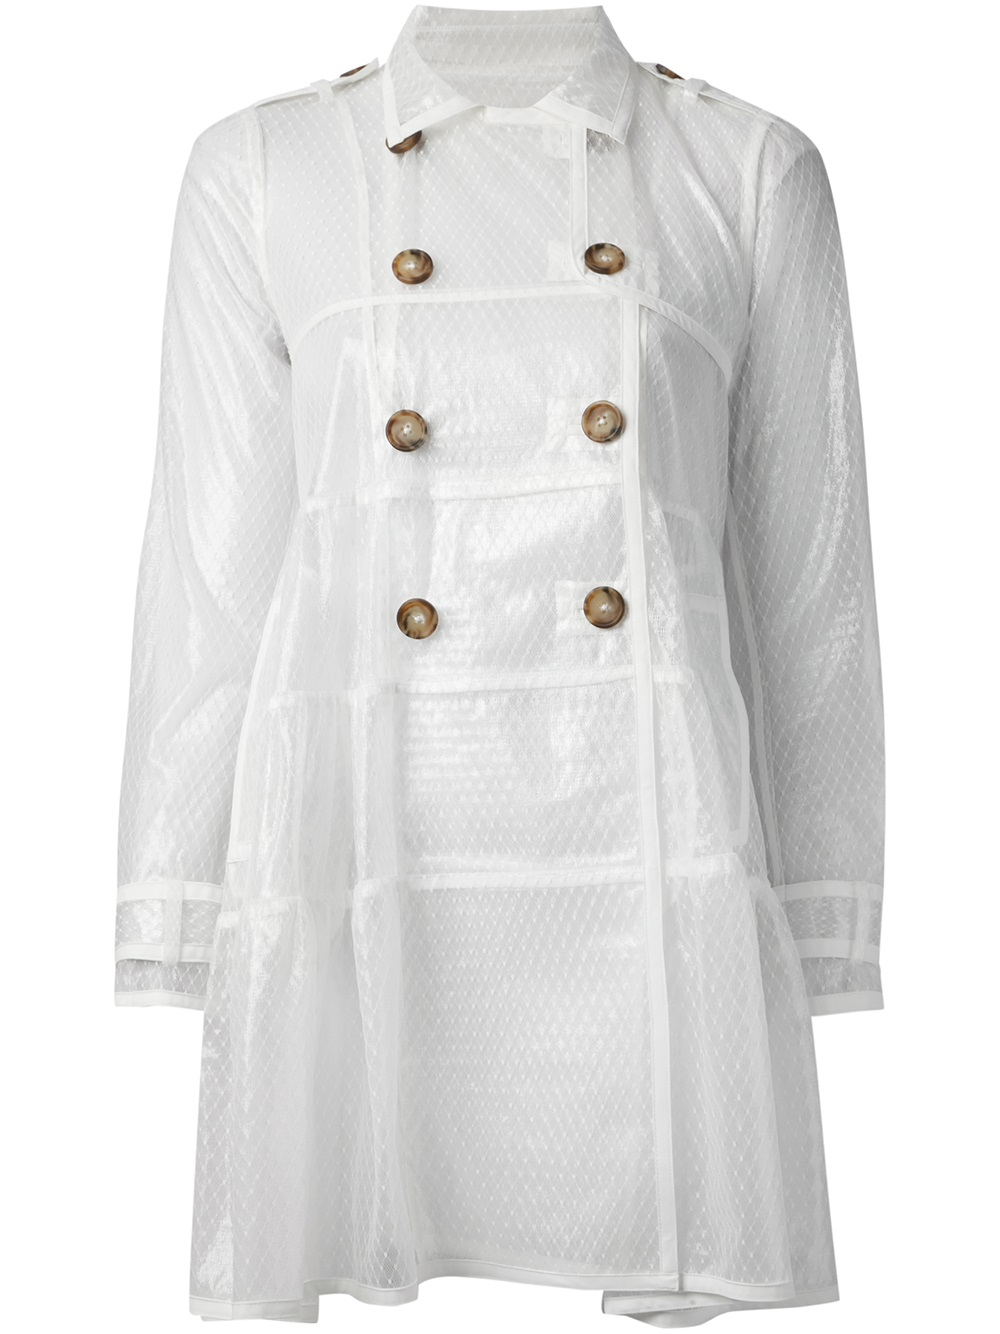 Lyst - Red Valentino Transparent Trench Coat in White